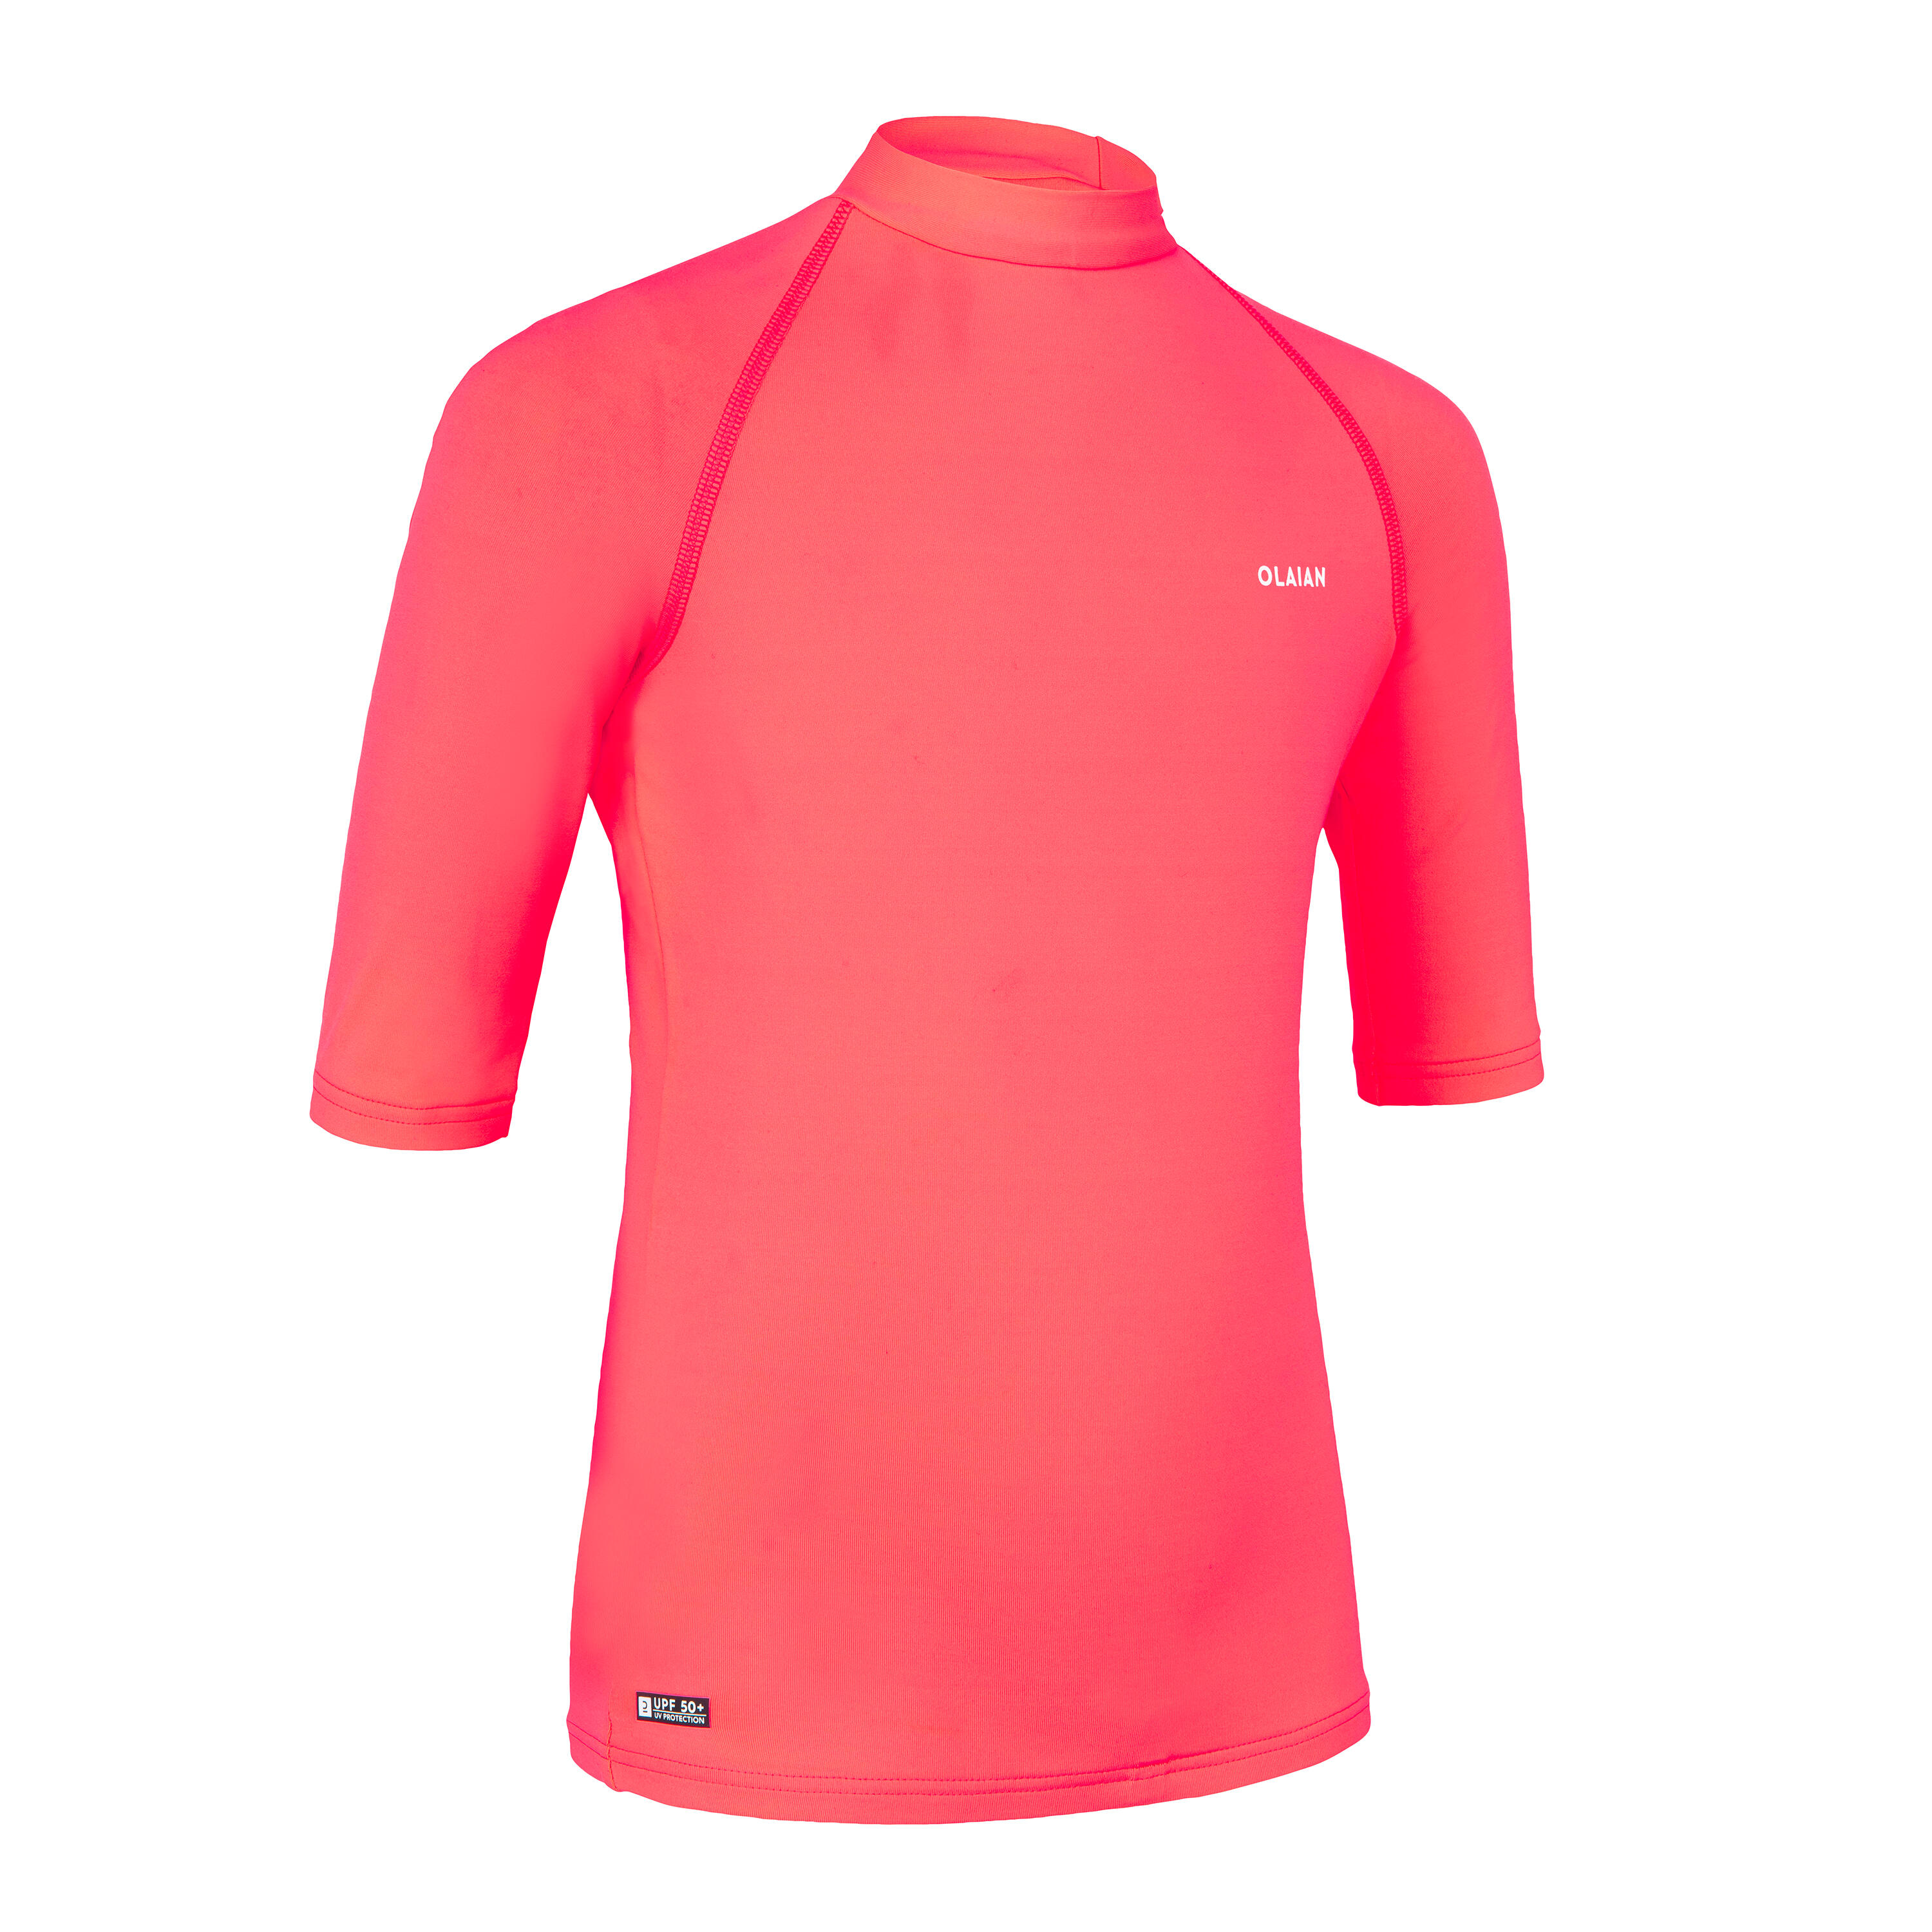 Kids' UV Protection Sun Top - Coral 6/7